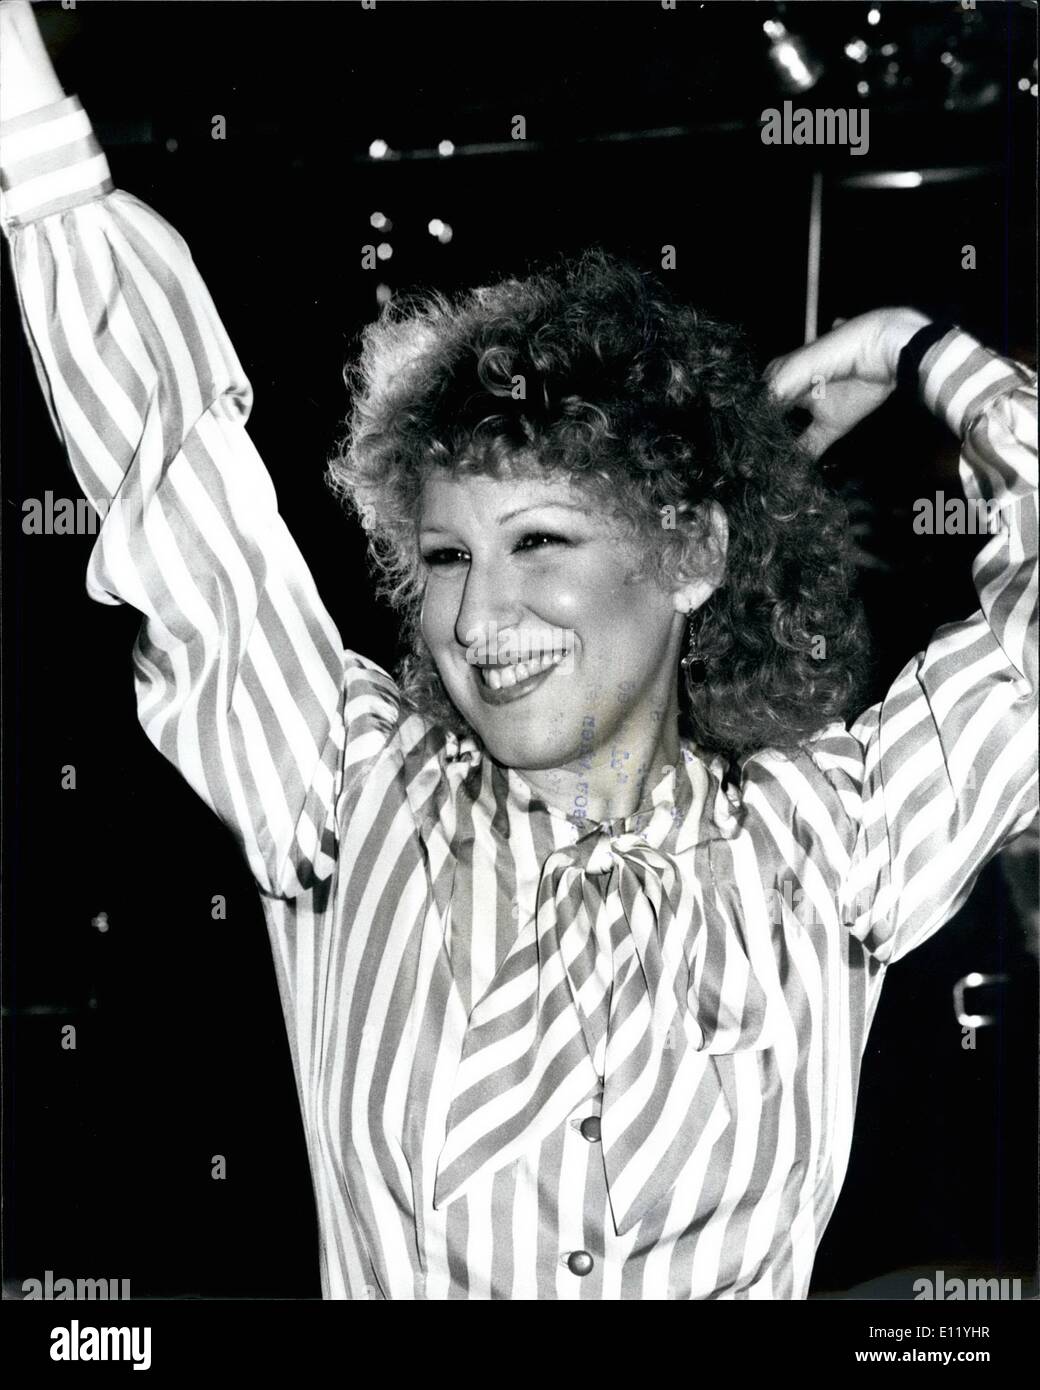 Jan. 01, 1981 - BETTE MIDLER IS IN TOWN Bette Midler, the outrageous American singing star is in *Lndon to promote her latest film,Divine Madnees,which one show at Stringfellow in upper St Martine Ione, in London yesterday. She said that she has ''cleaned up'' since her famous TV encounter with Michael Parkinson,when she offered to strip on his show. PHOTO SHOW: Bette Miper pictured during press conference in London Yesterday Stock Photo